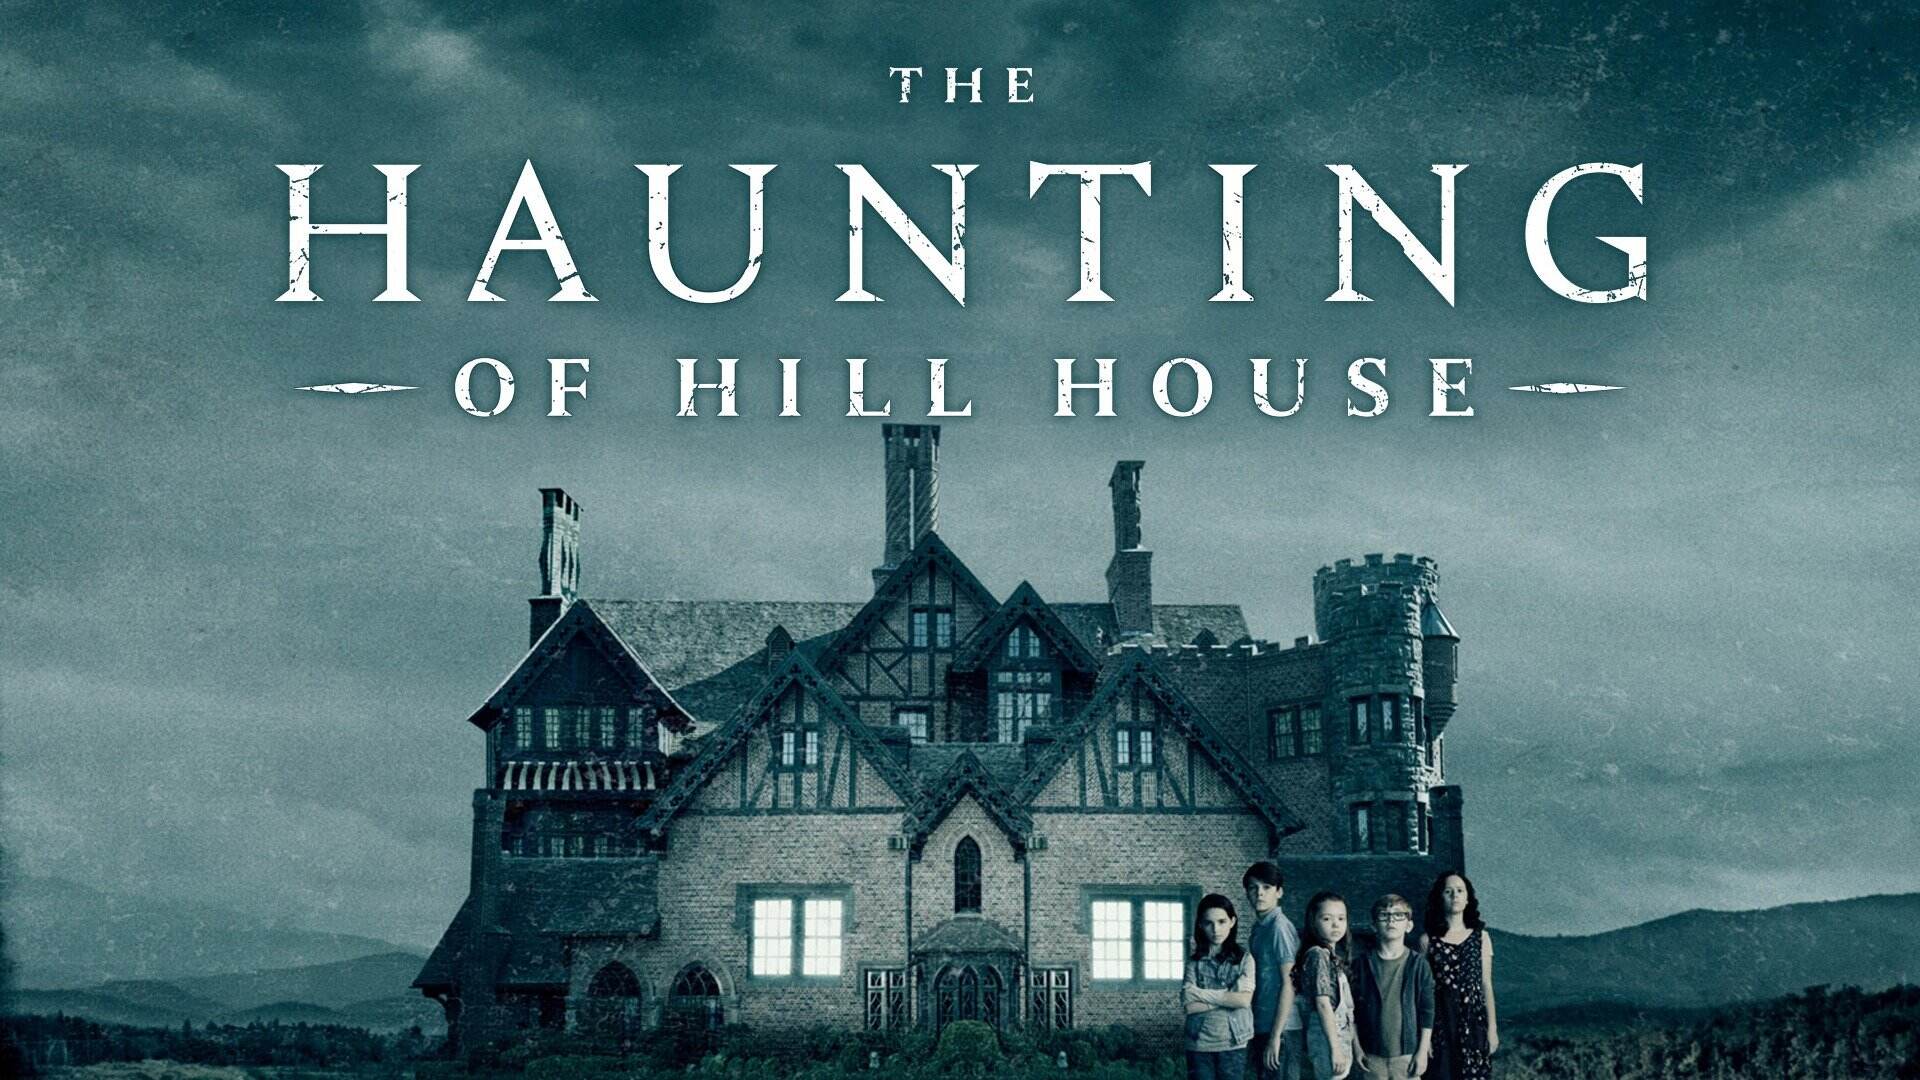 12-astonishing-facts-about-the-haunting-of-hill-house